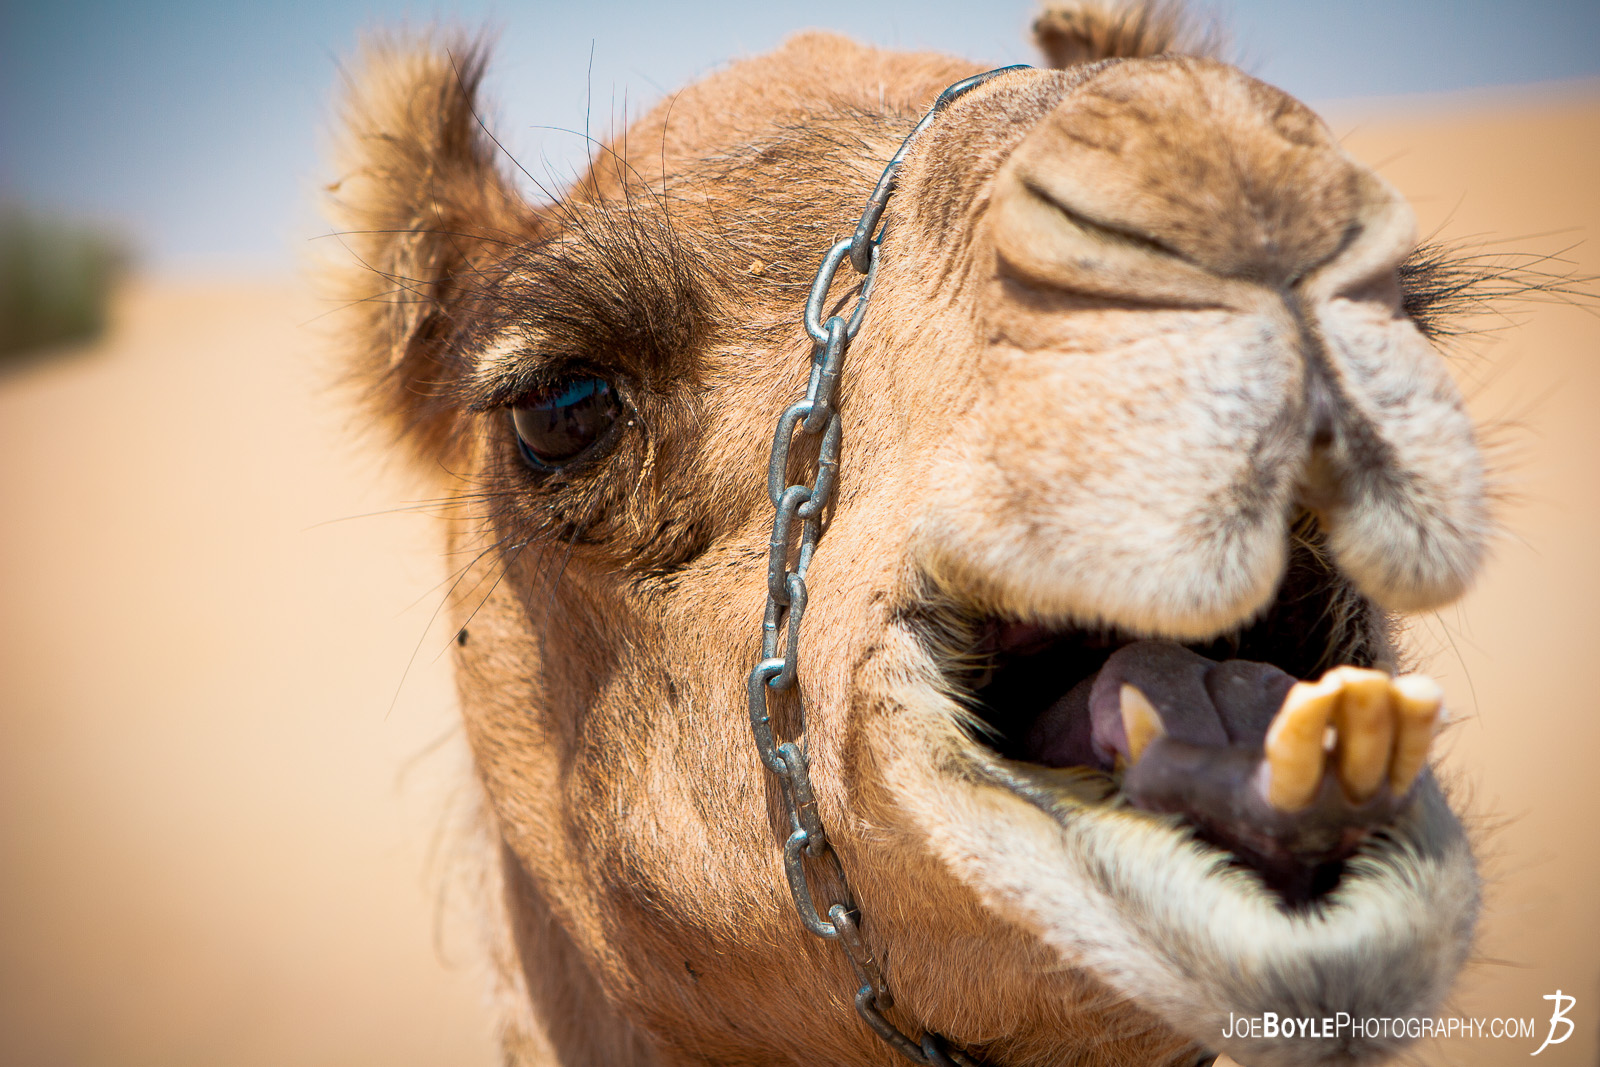  I was on tour with MegaDeth during their 2012 "Countdown to Extinction" tour. We had a stop over in Dubai, UAE and we had an opportunity to go on a desert safari where I was able to photograph this camel! 